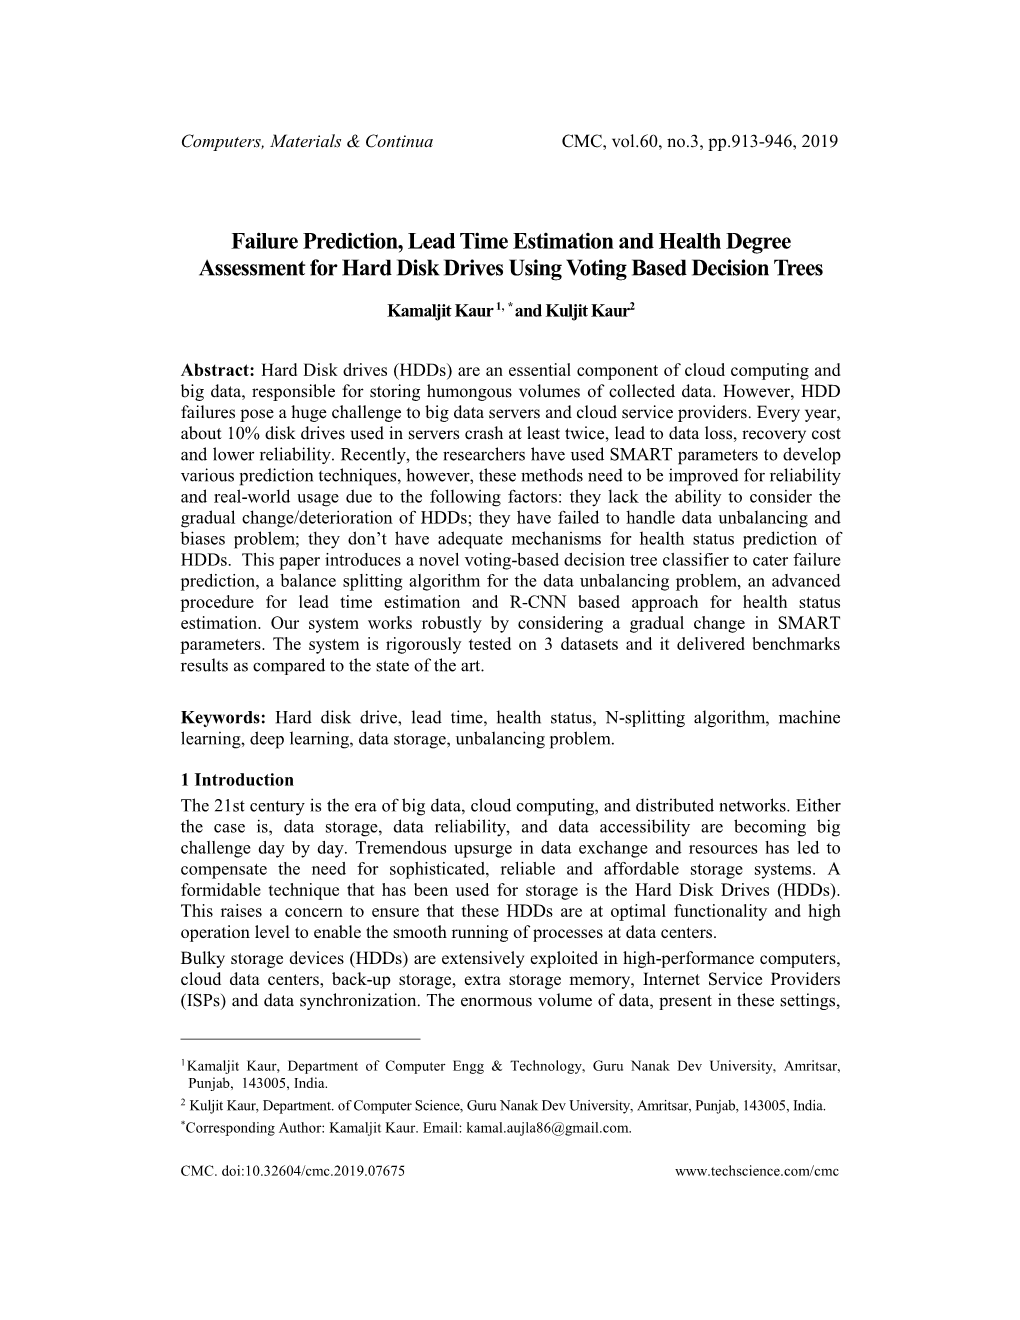 Failure Prediction, Lead Time Estimation and Health Degree Assessment for Hard Disk Drives Using Voting Based Decision Trees